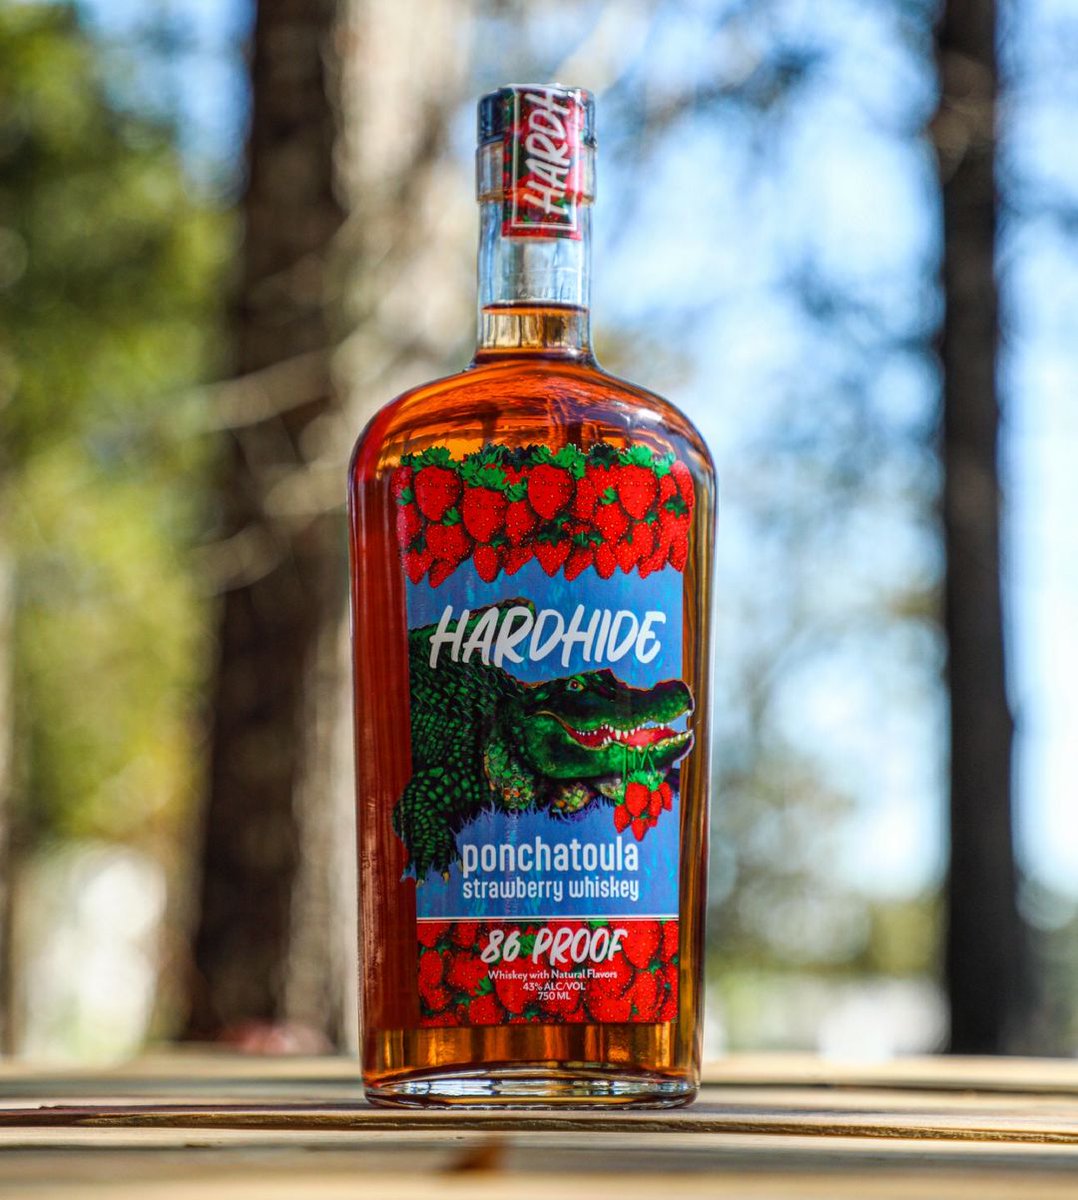 Did you know that @HardhideWhiskey is made with fresh strawberries from Ponchatoula, LA? At 86 proof, it packs heat and flavor. 🍓 ow.ly/K7bm50Rlyru